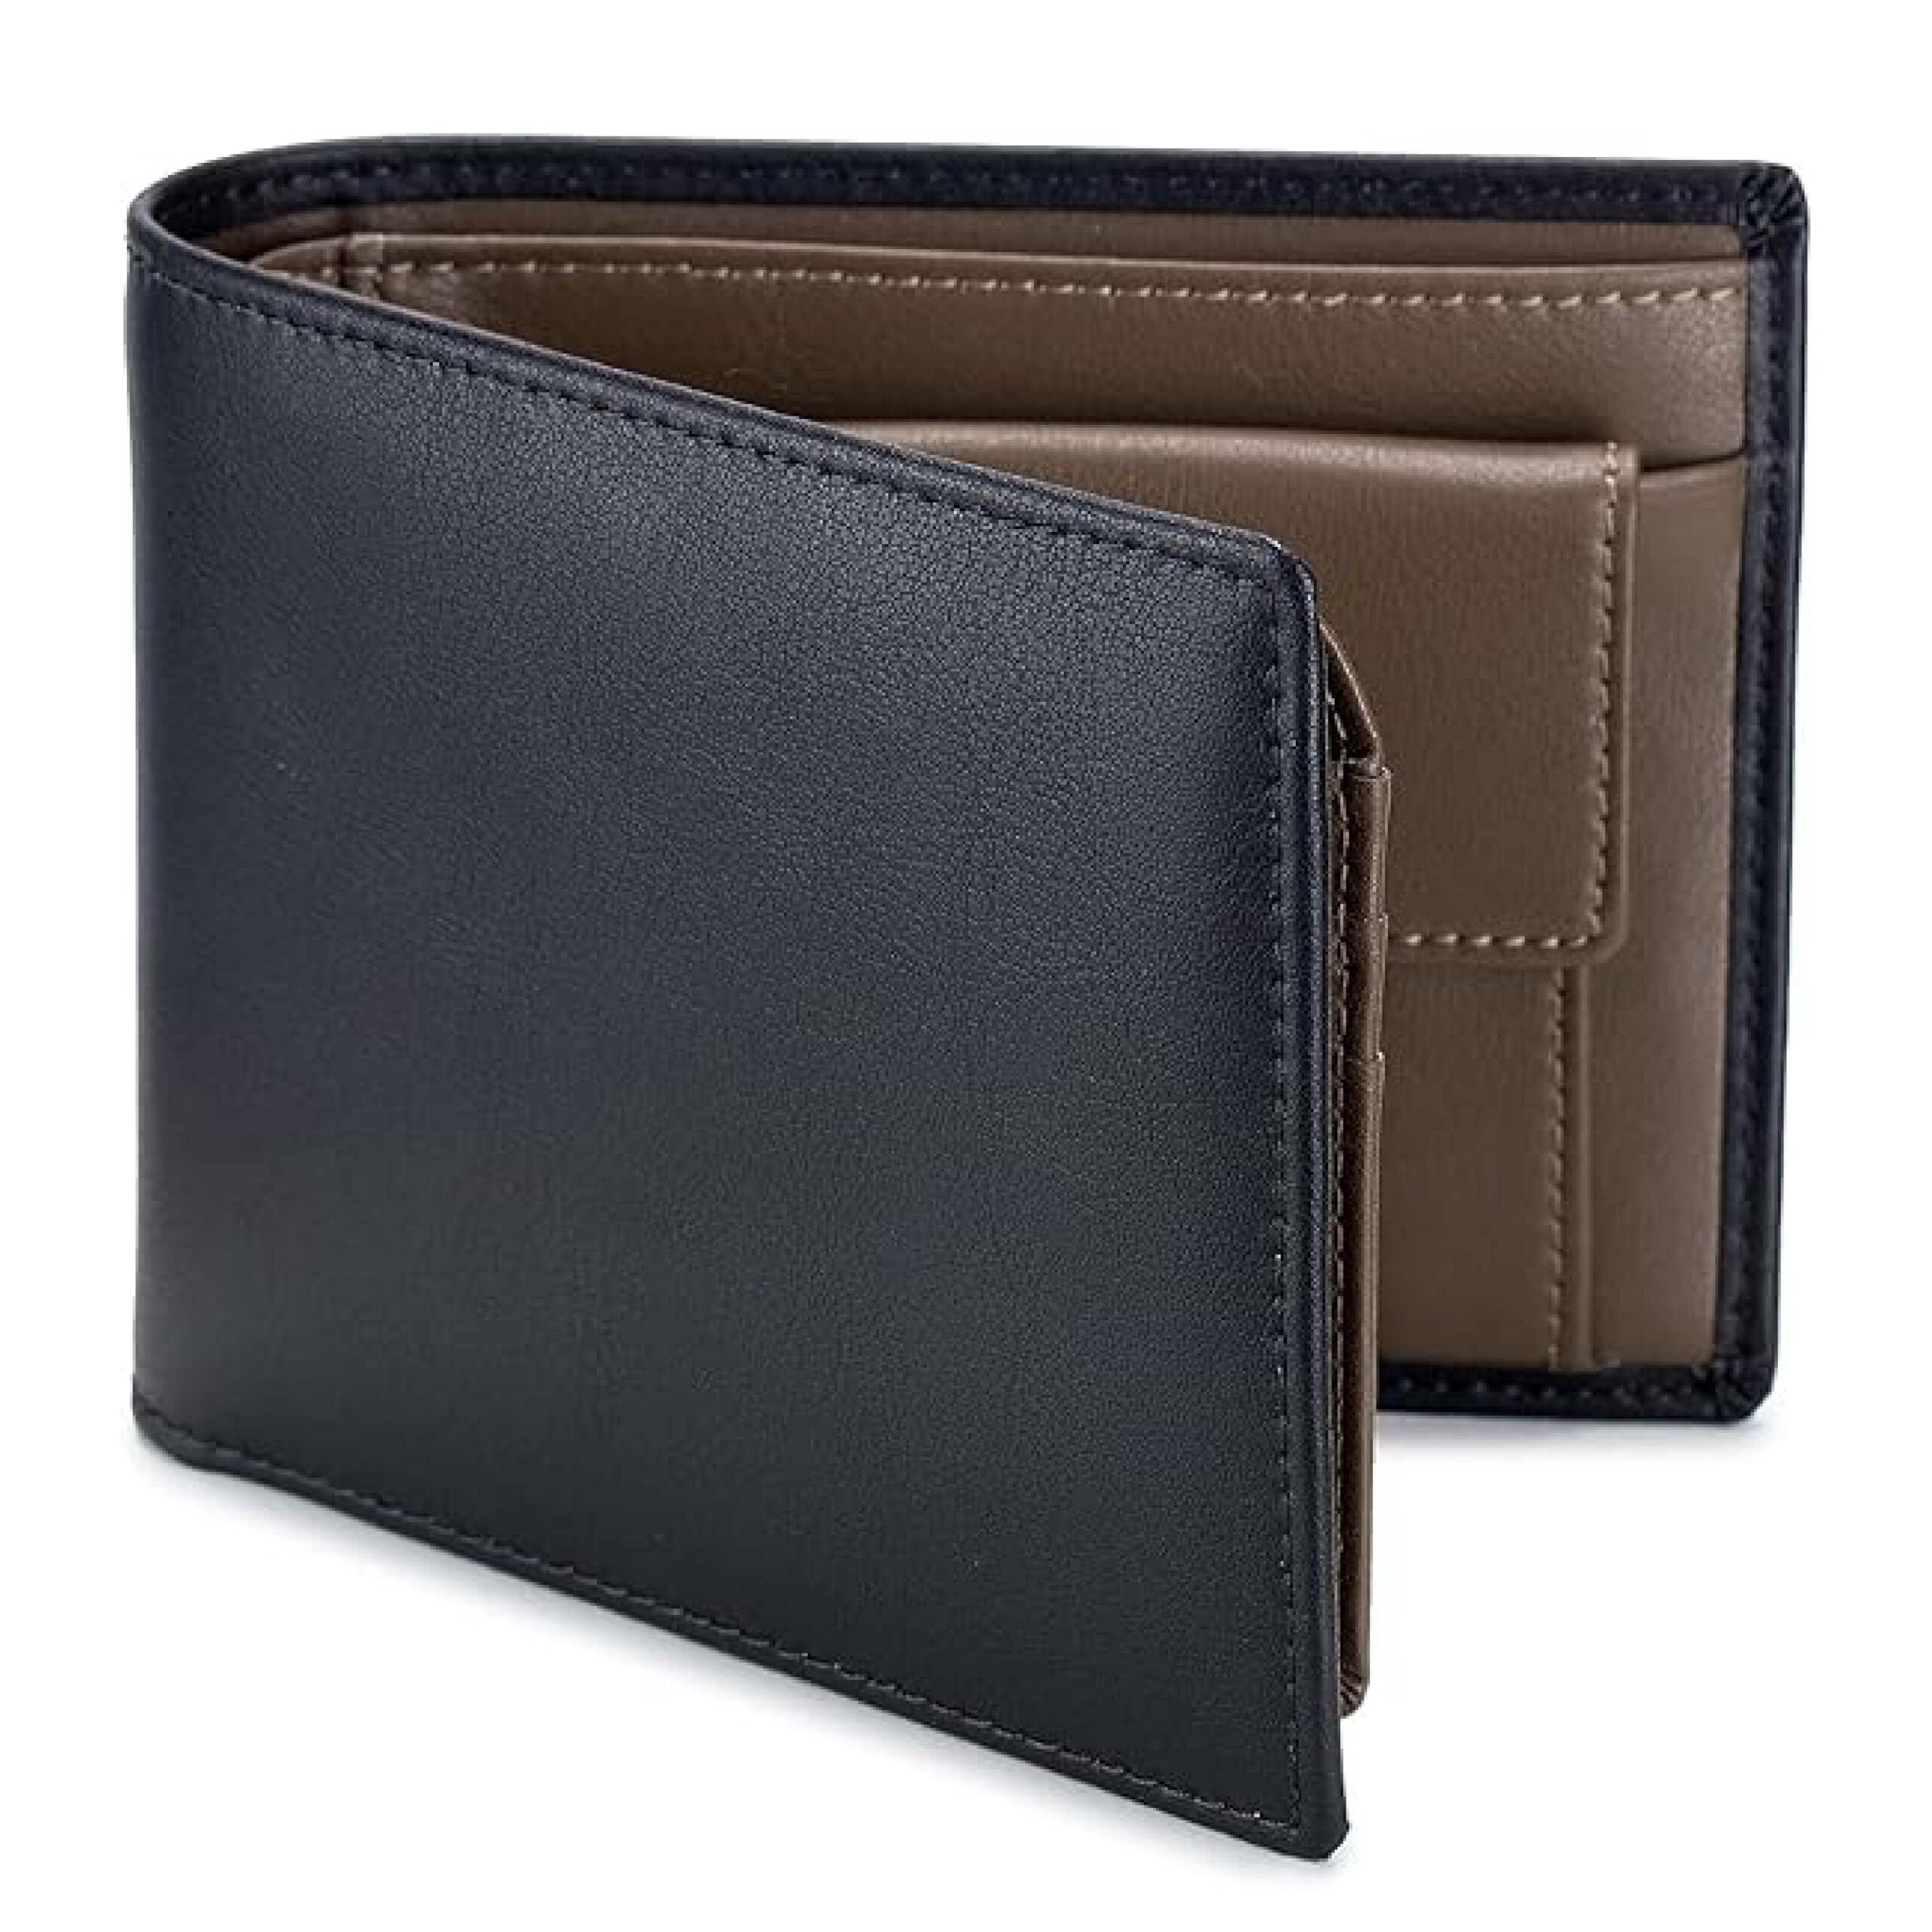 Leather Men's Wallet with Coin Pocket